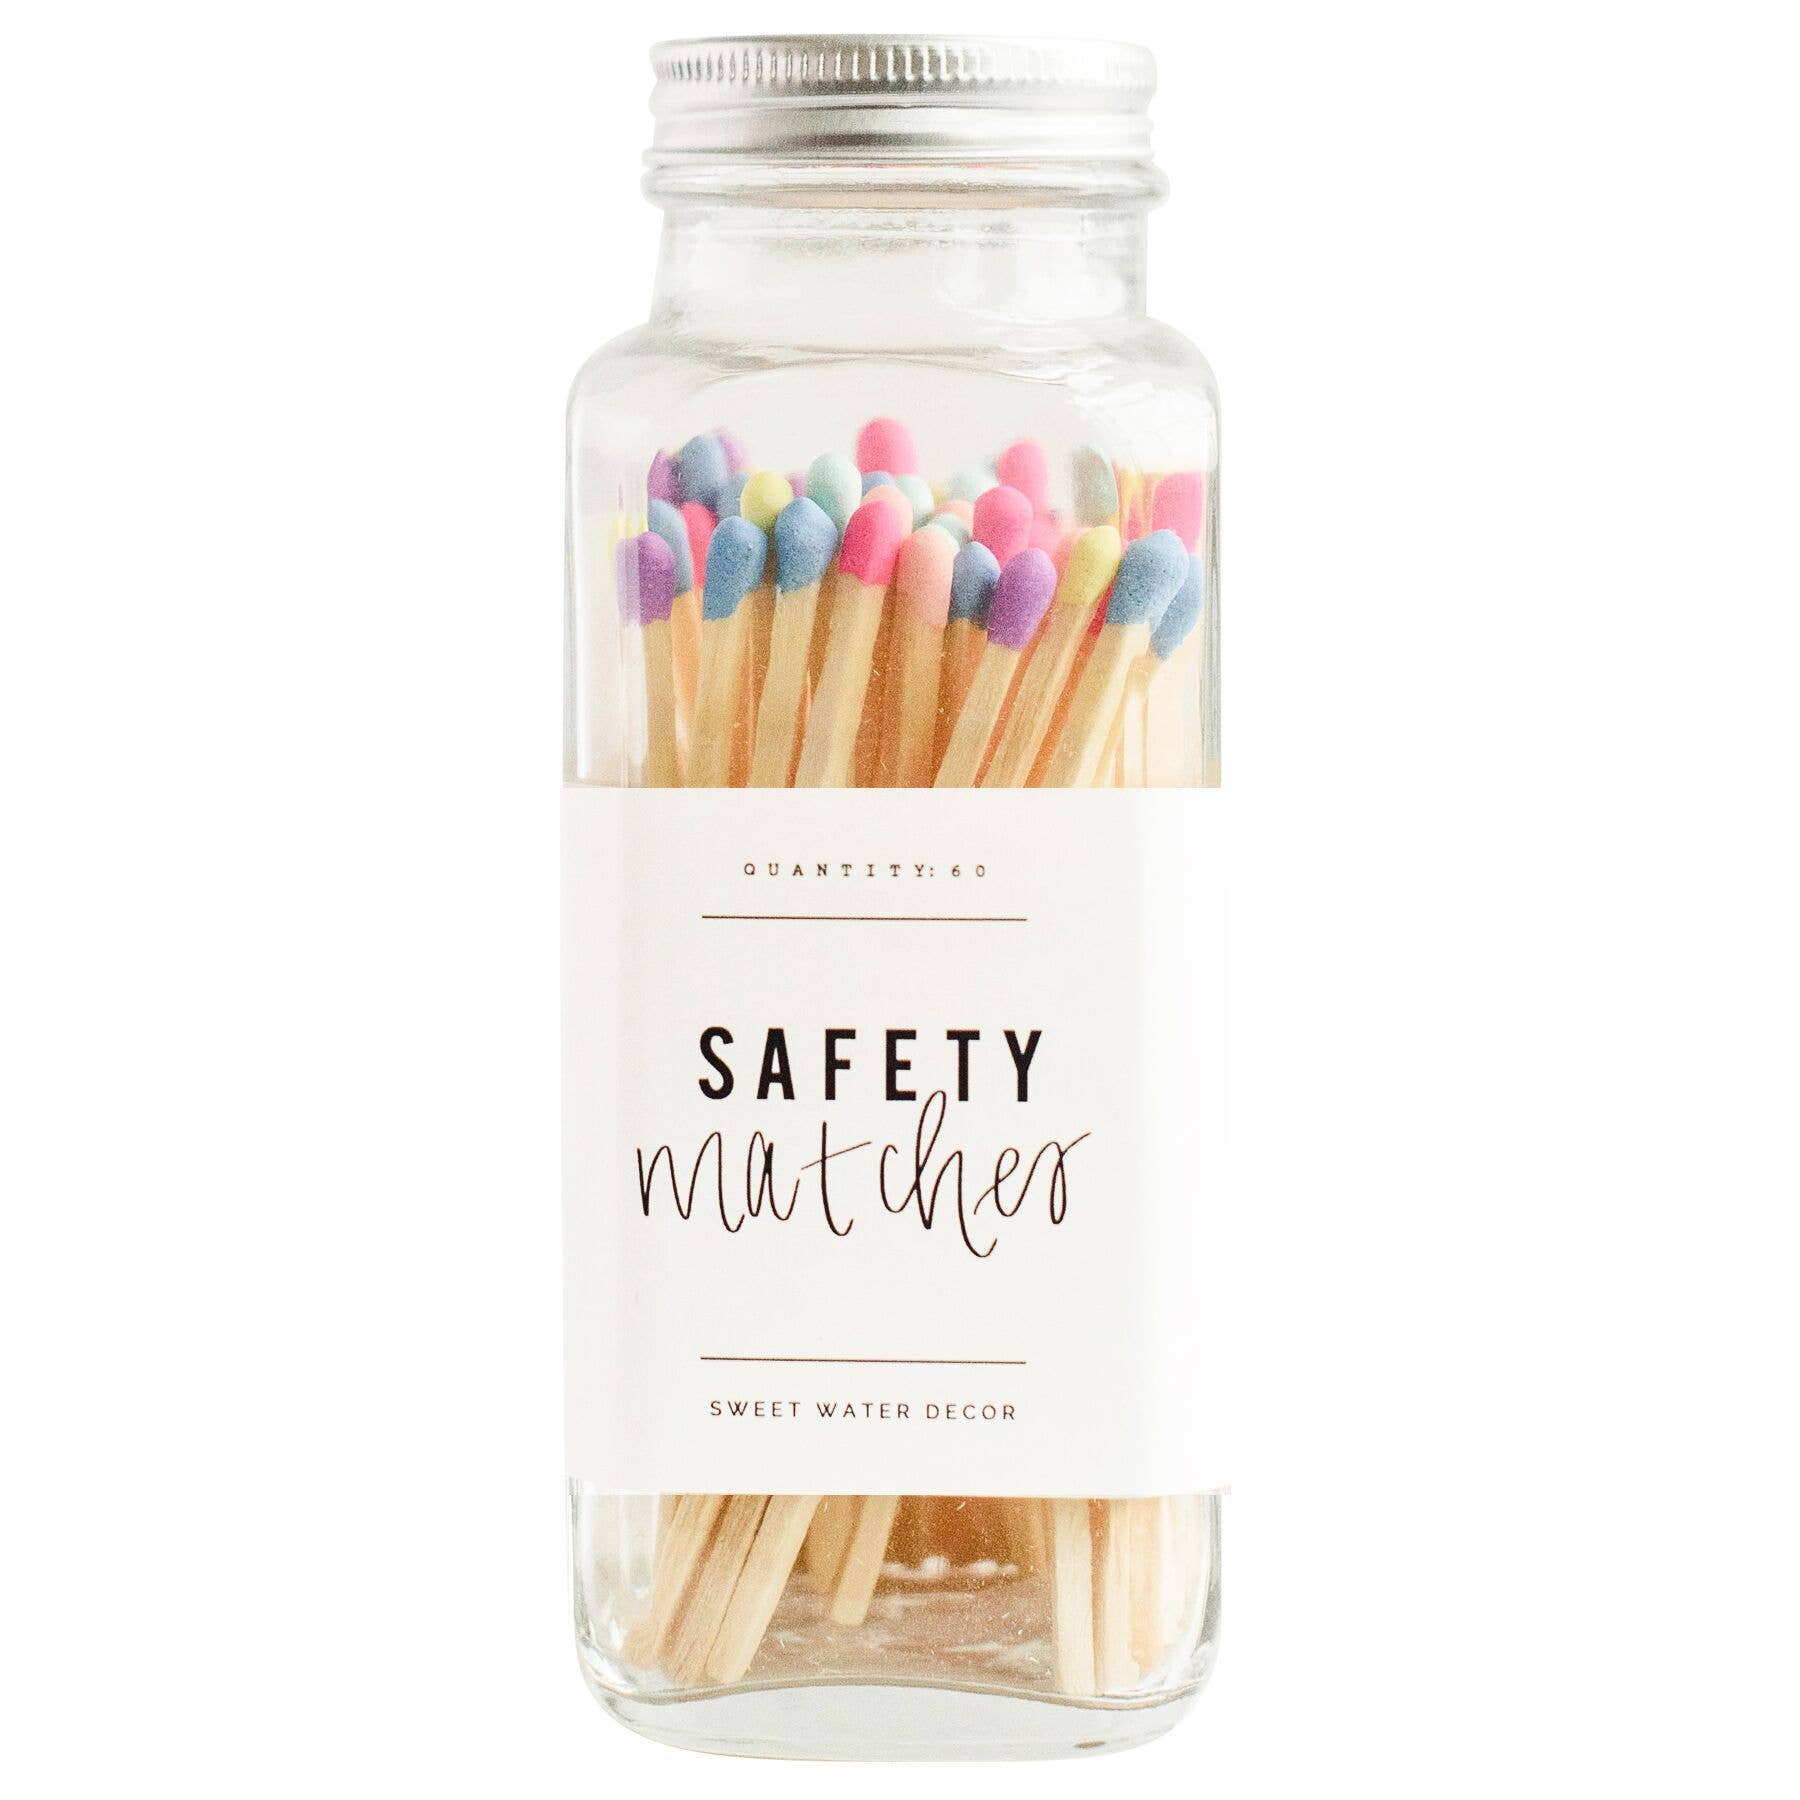 Safety Matches - Multicolor Rainbow Tip - The Preppy Bunny